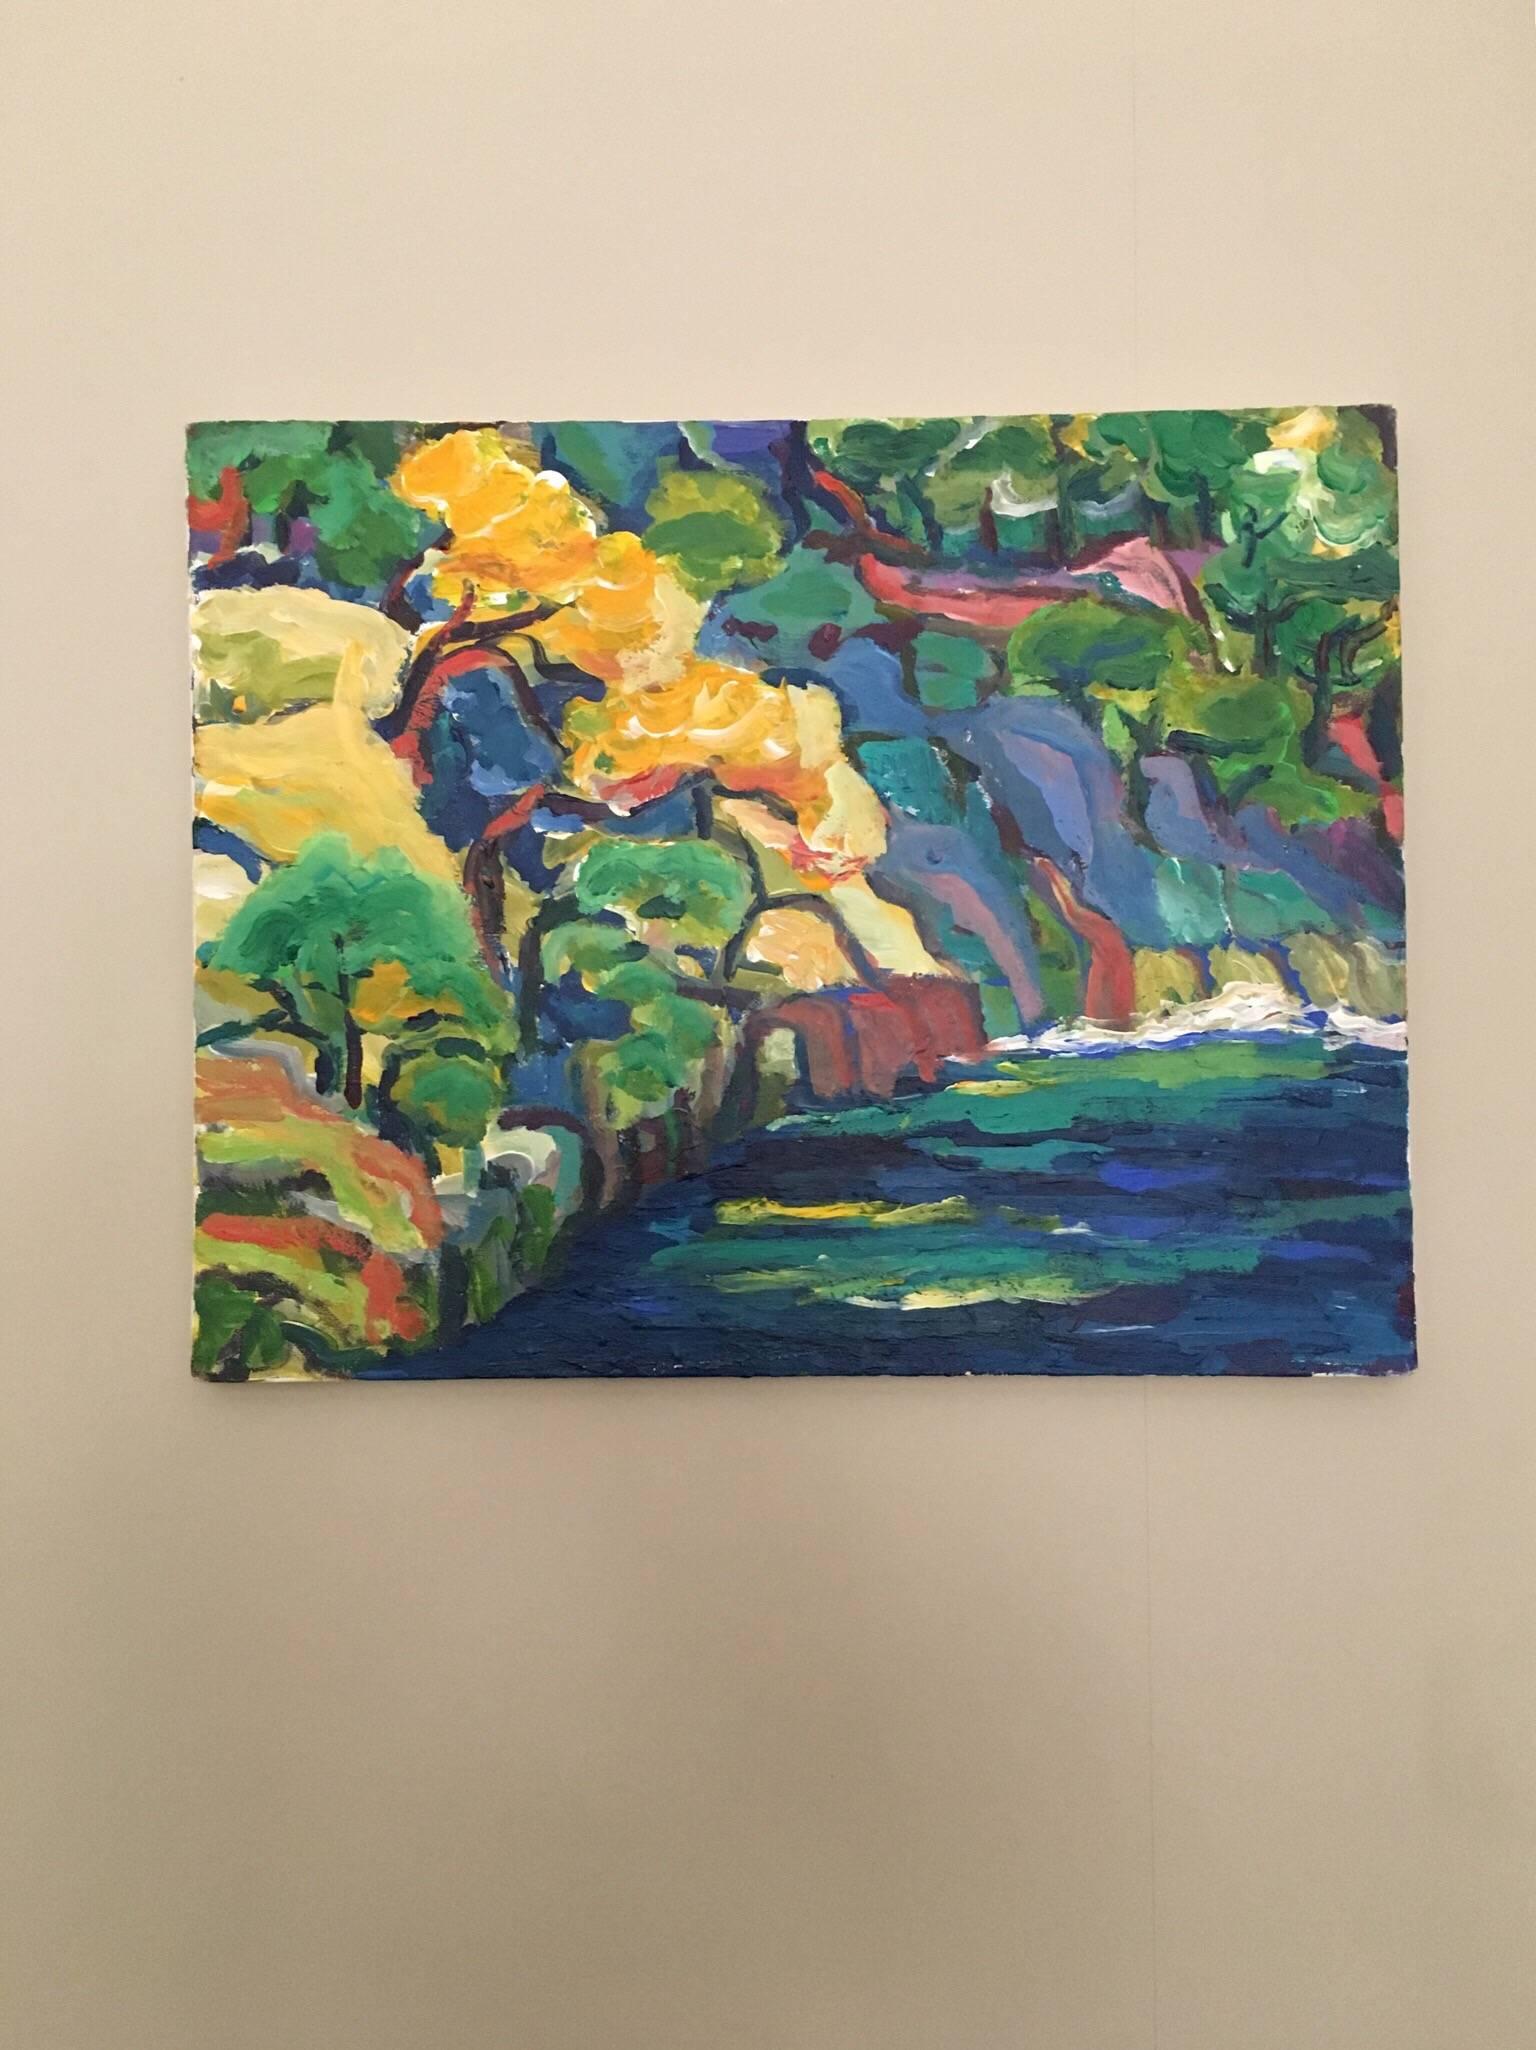 Impressionist Landscape, Blue Palette, Oil Painting
by Pamela Cawley, British 20th century
oil painting, unframed
board: 20 x 16 inches 

Stunning original Impressionist oil painting by the 20th century British artist, Pamela Cawley. The work has